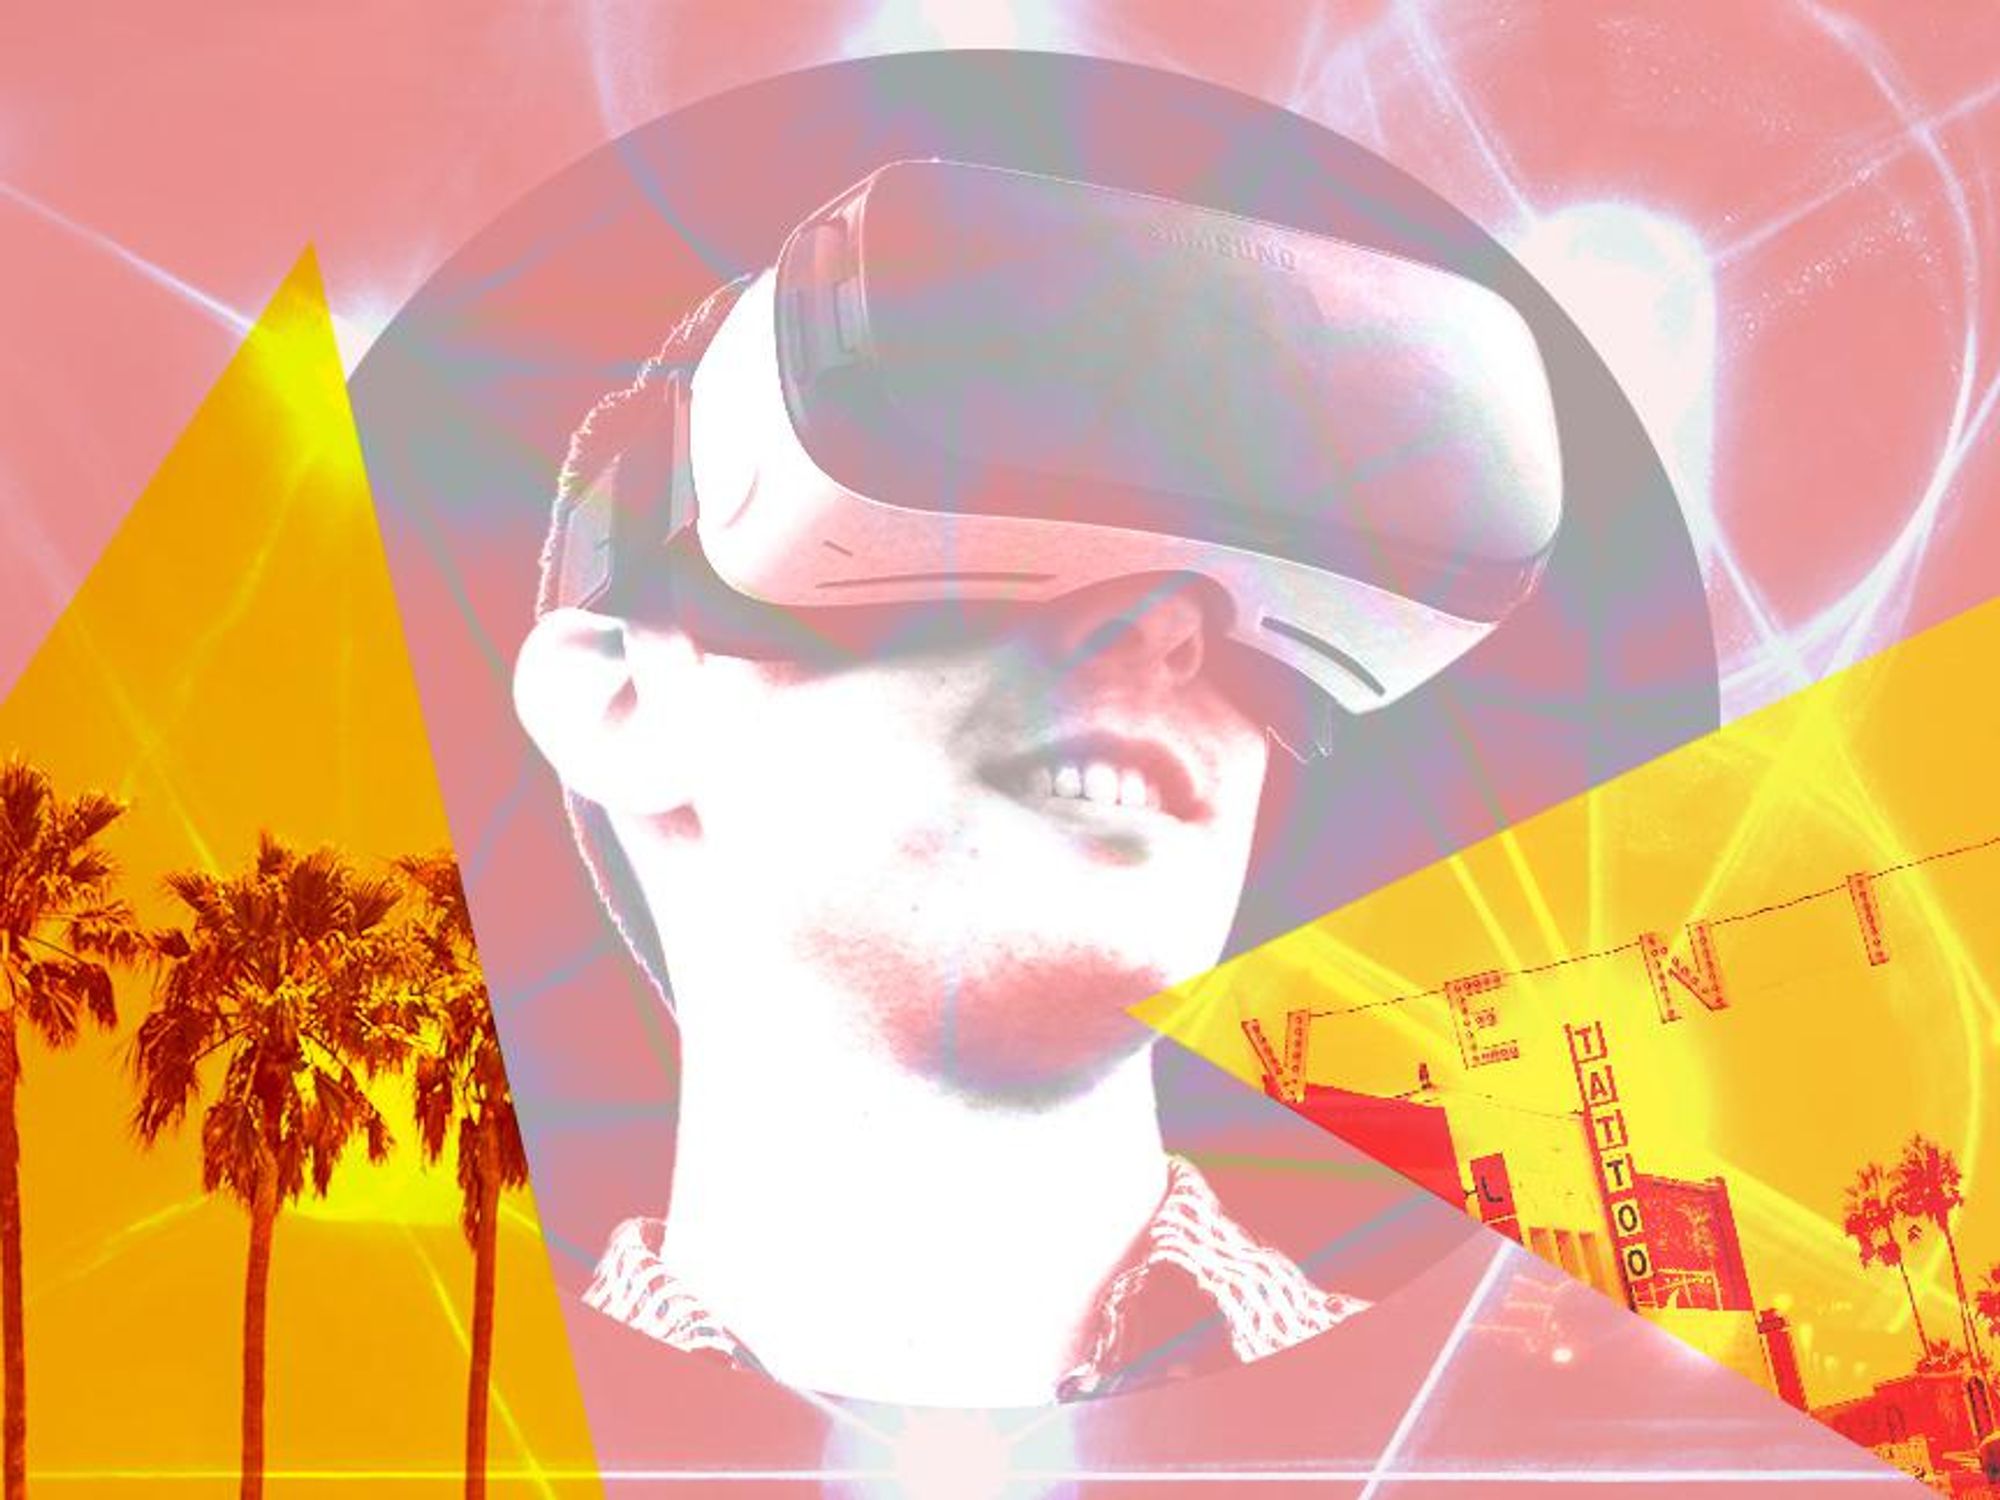 Los Angeles' Guide to the Metaverse 